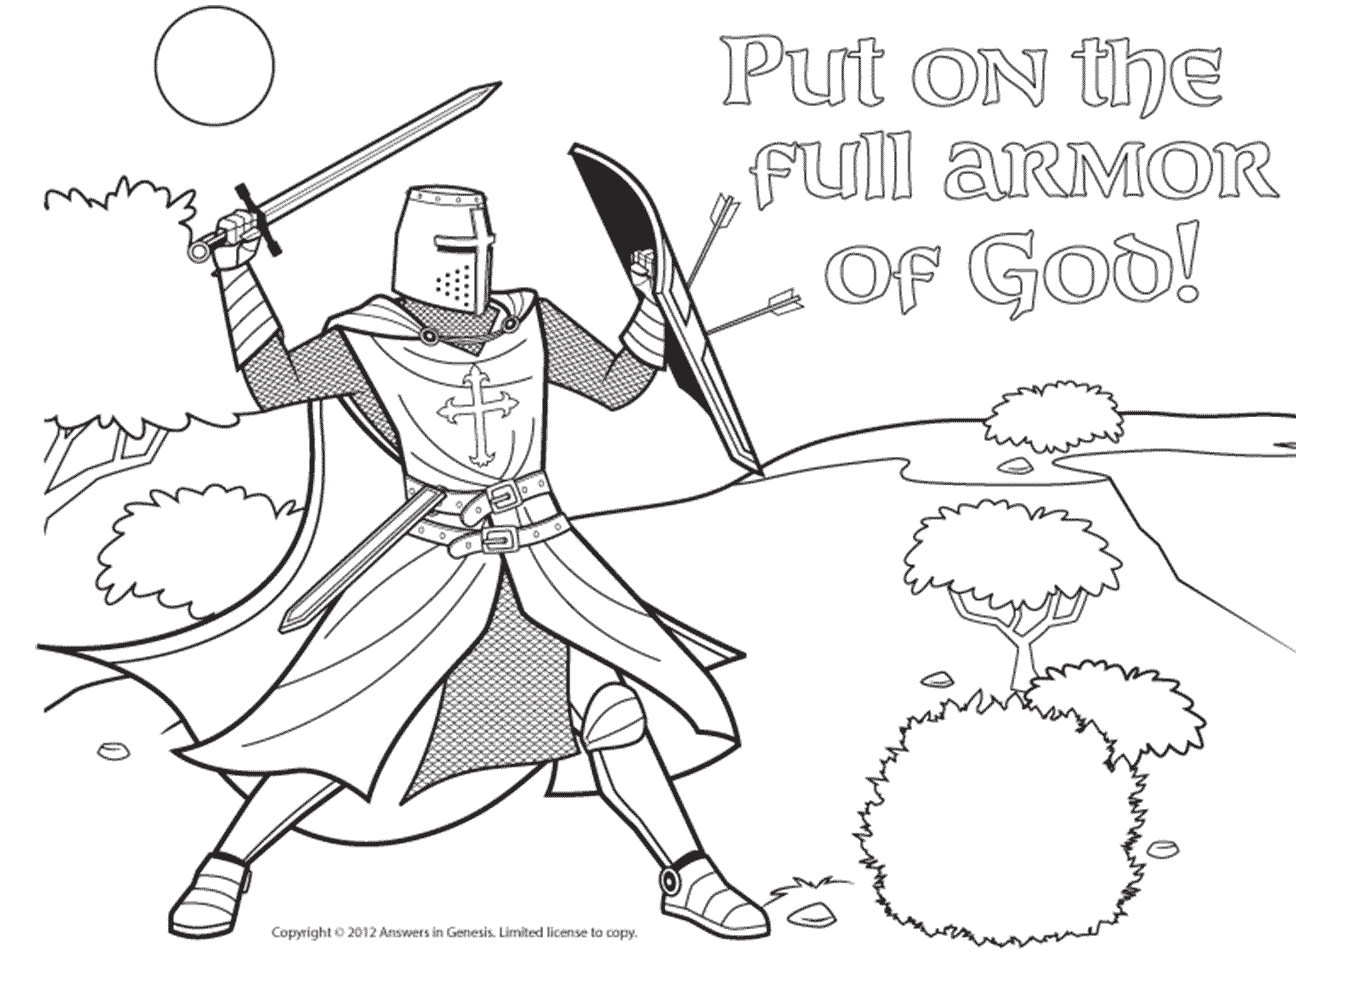 418 Unicorn Armor Of God For Kids Coloring Pages with Printable